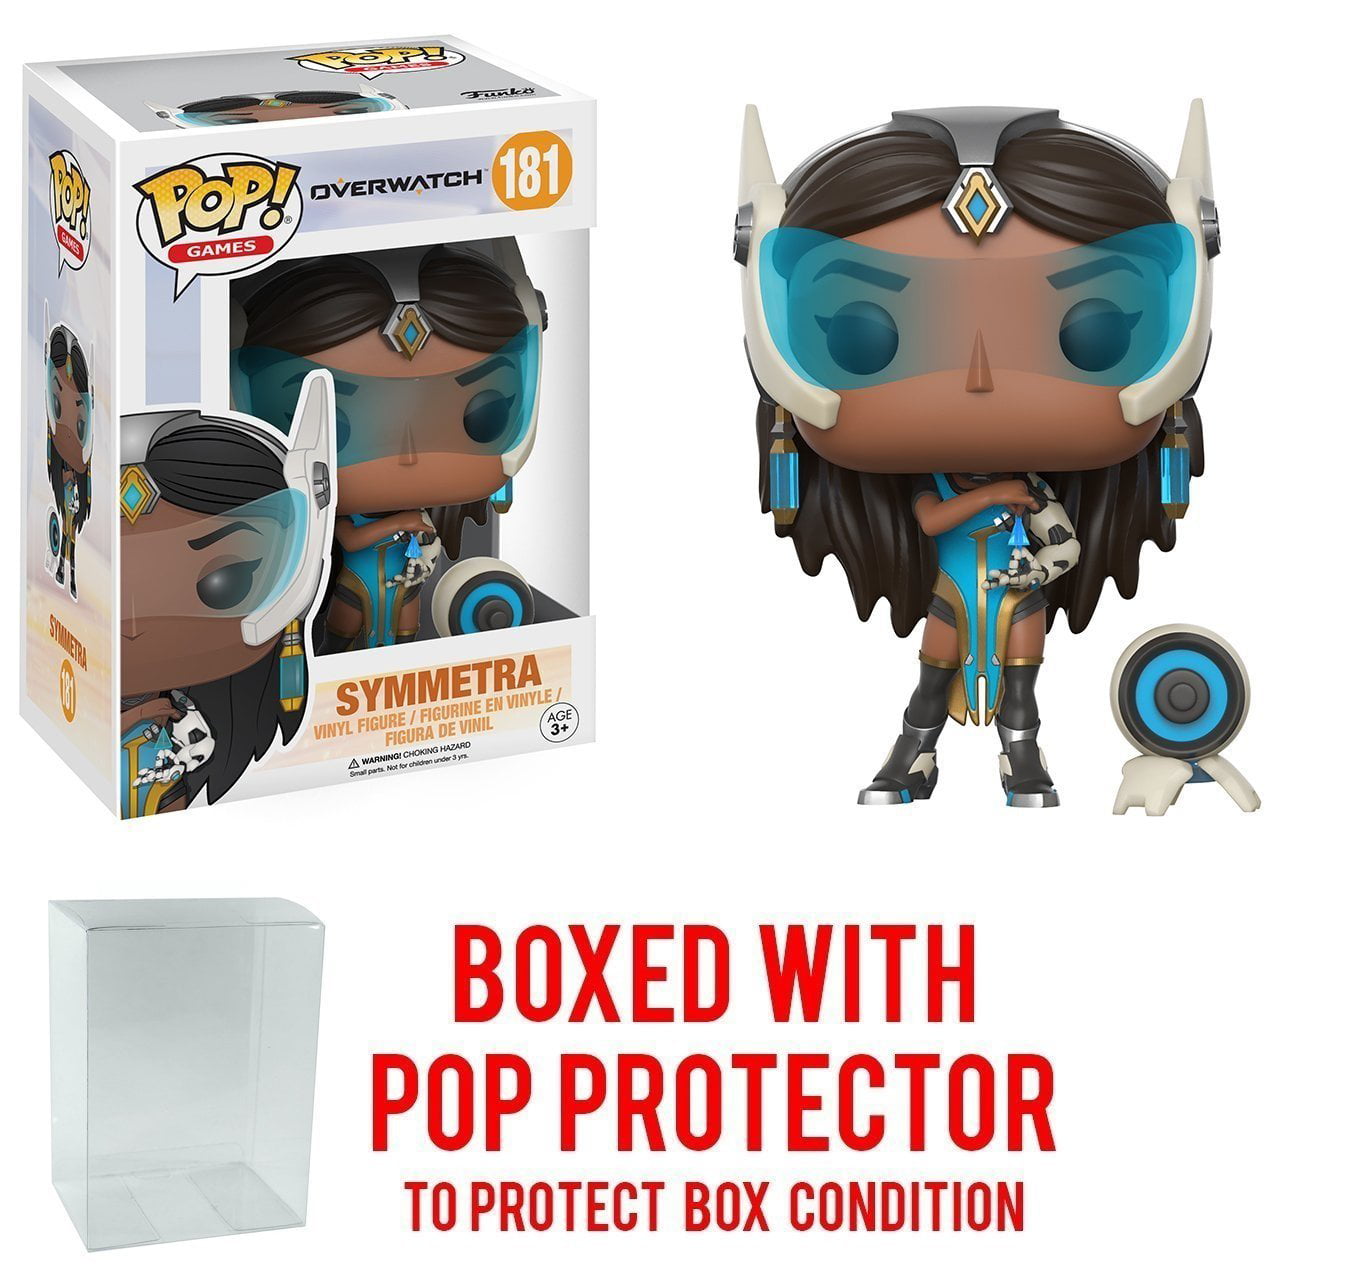 Funko Pop Games Overwatch Symmetra Vinyl Figure Bundled With Pop Box Protector Case Bundled Plastic Box Protector With The Collector In Mind Removable Film By Pop Protector Walmart Com Walmart Com